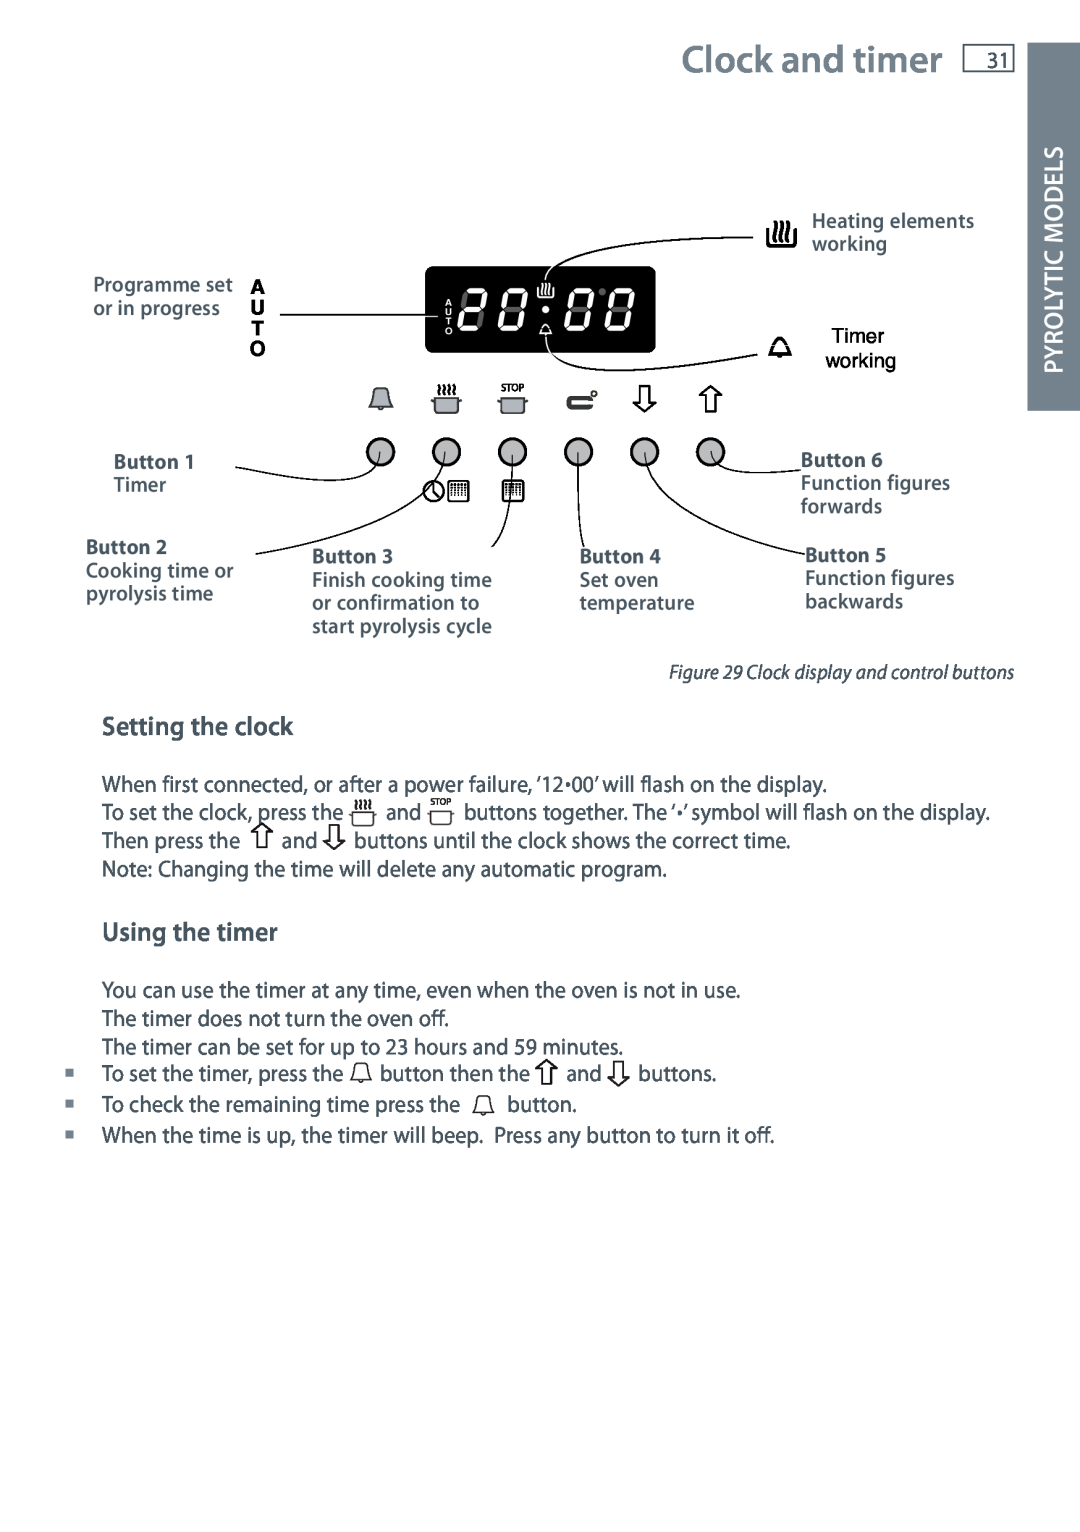 Fisher & Paykel OB60 installation instructions Clock and timer, Setting the clock, Using the timer, Pyrolytic Models 